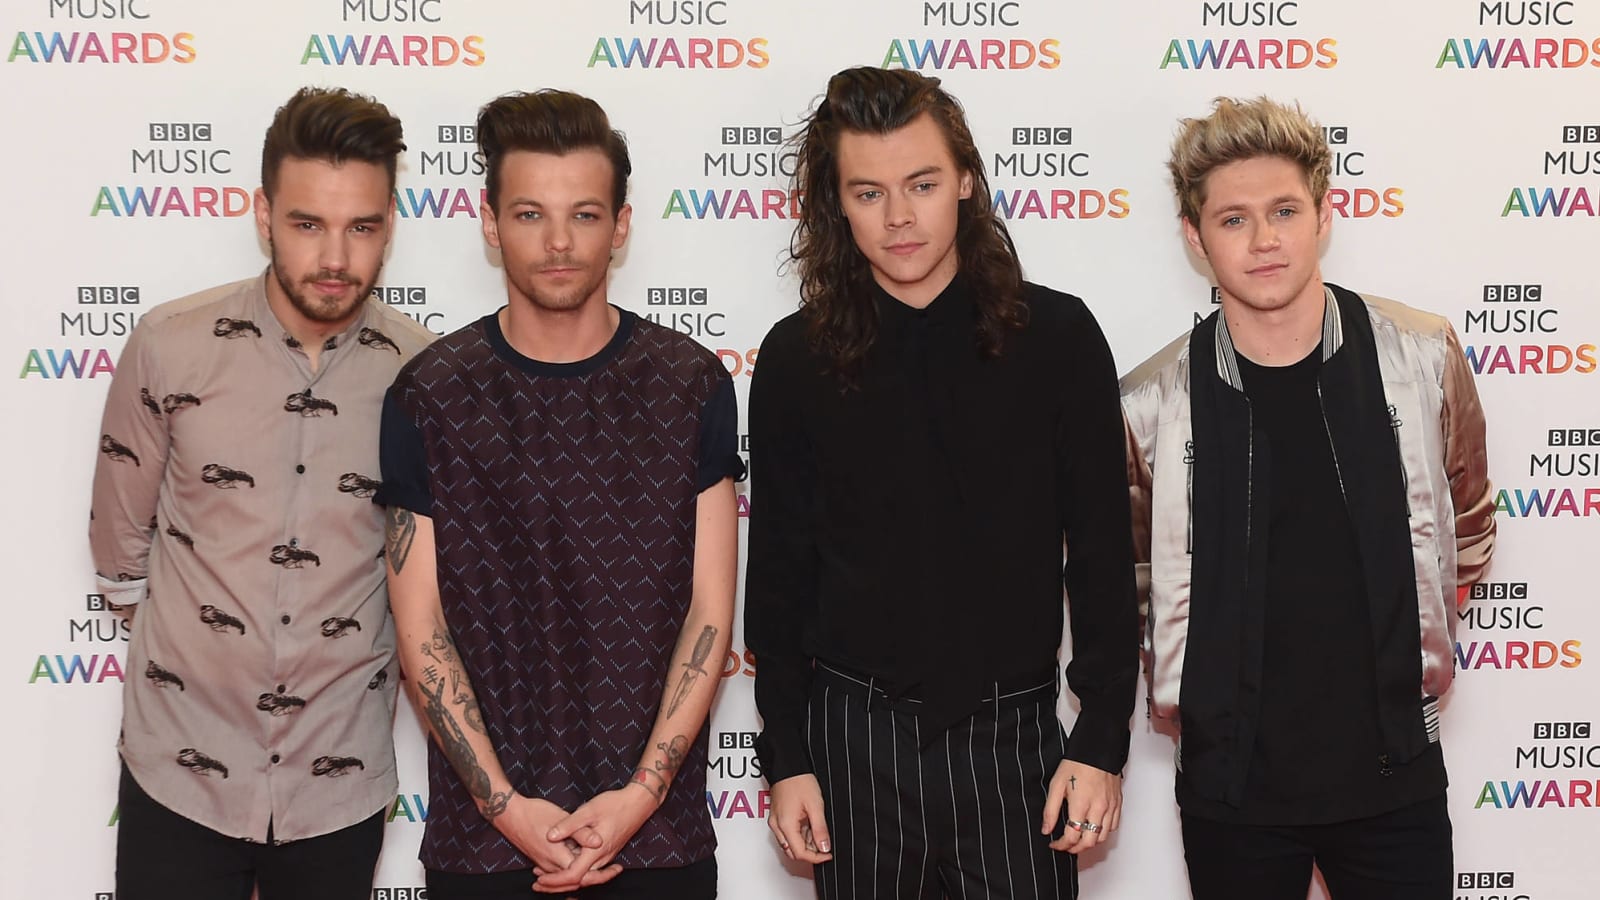 One Direction's Liam Payne keeps ignoring bandmate Louis Tomlinson's calls